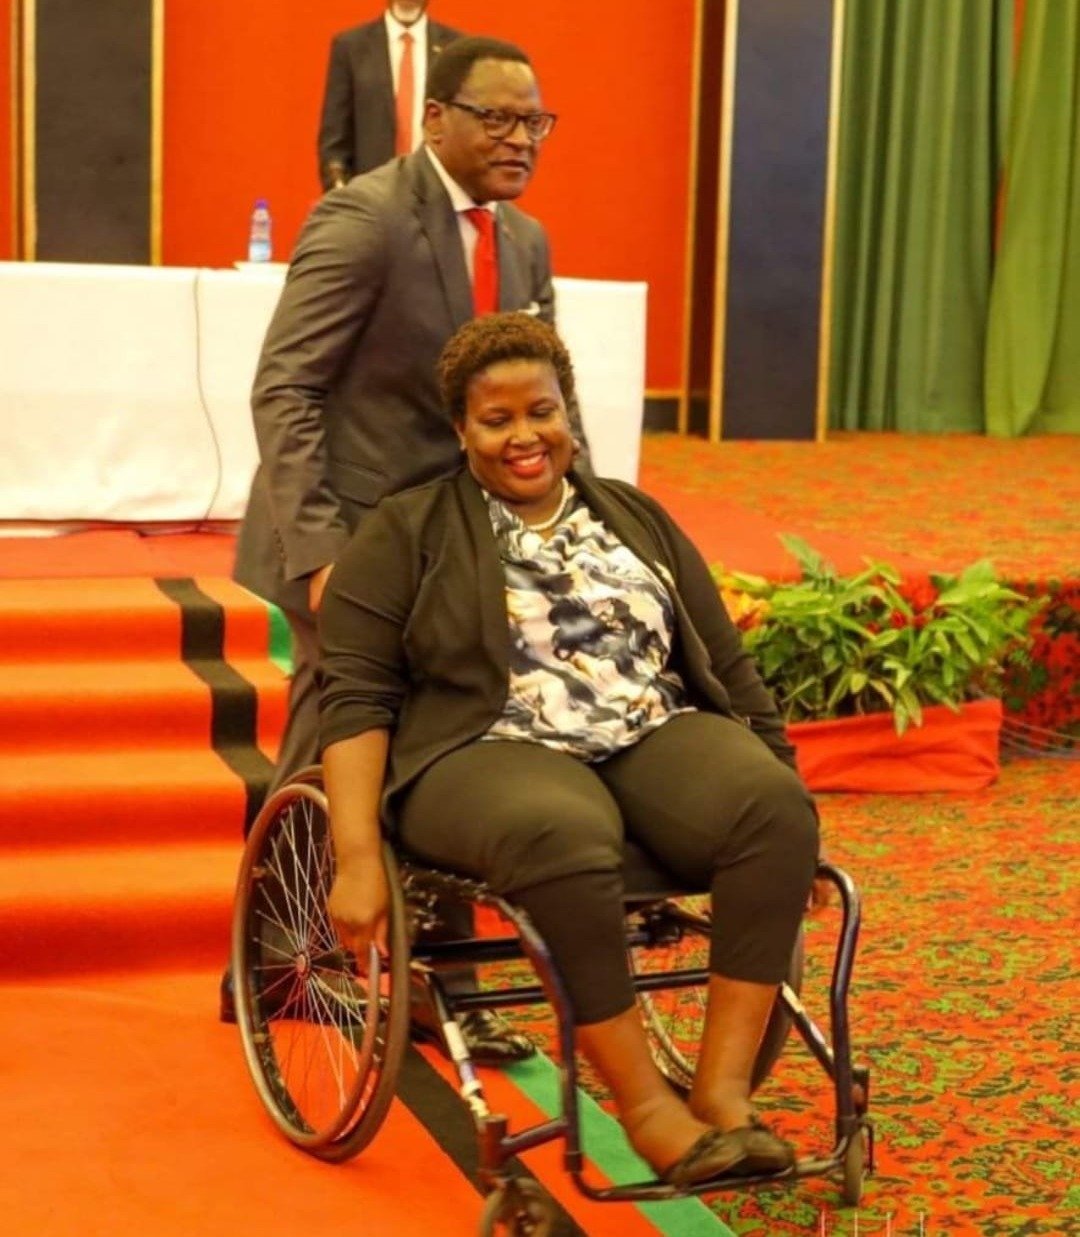 PRESIDENT CHAKWERA HAS ASSENTED TO PERSONS WITH DISABILITIES BILL